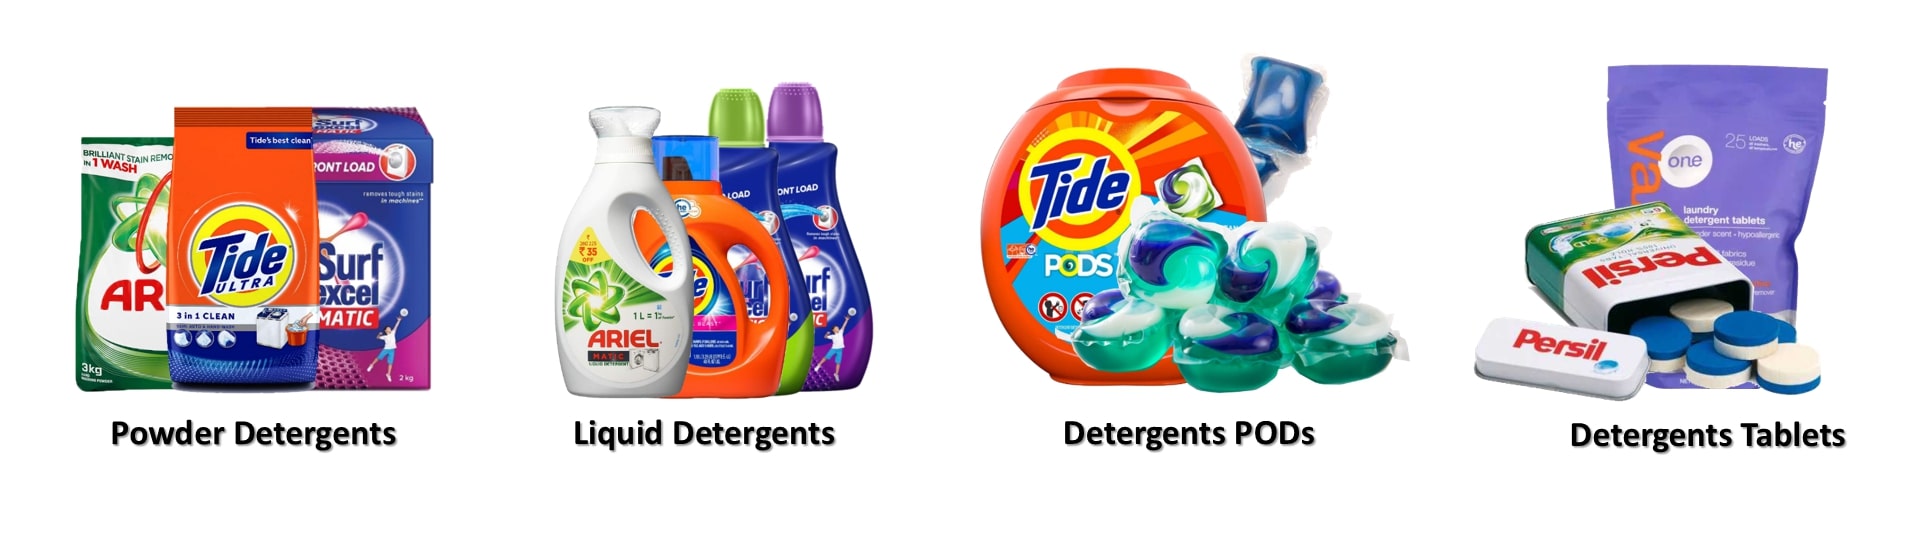 Types of detergents based on their physical states